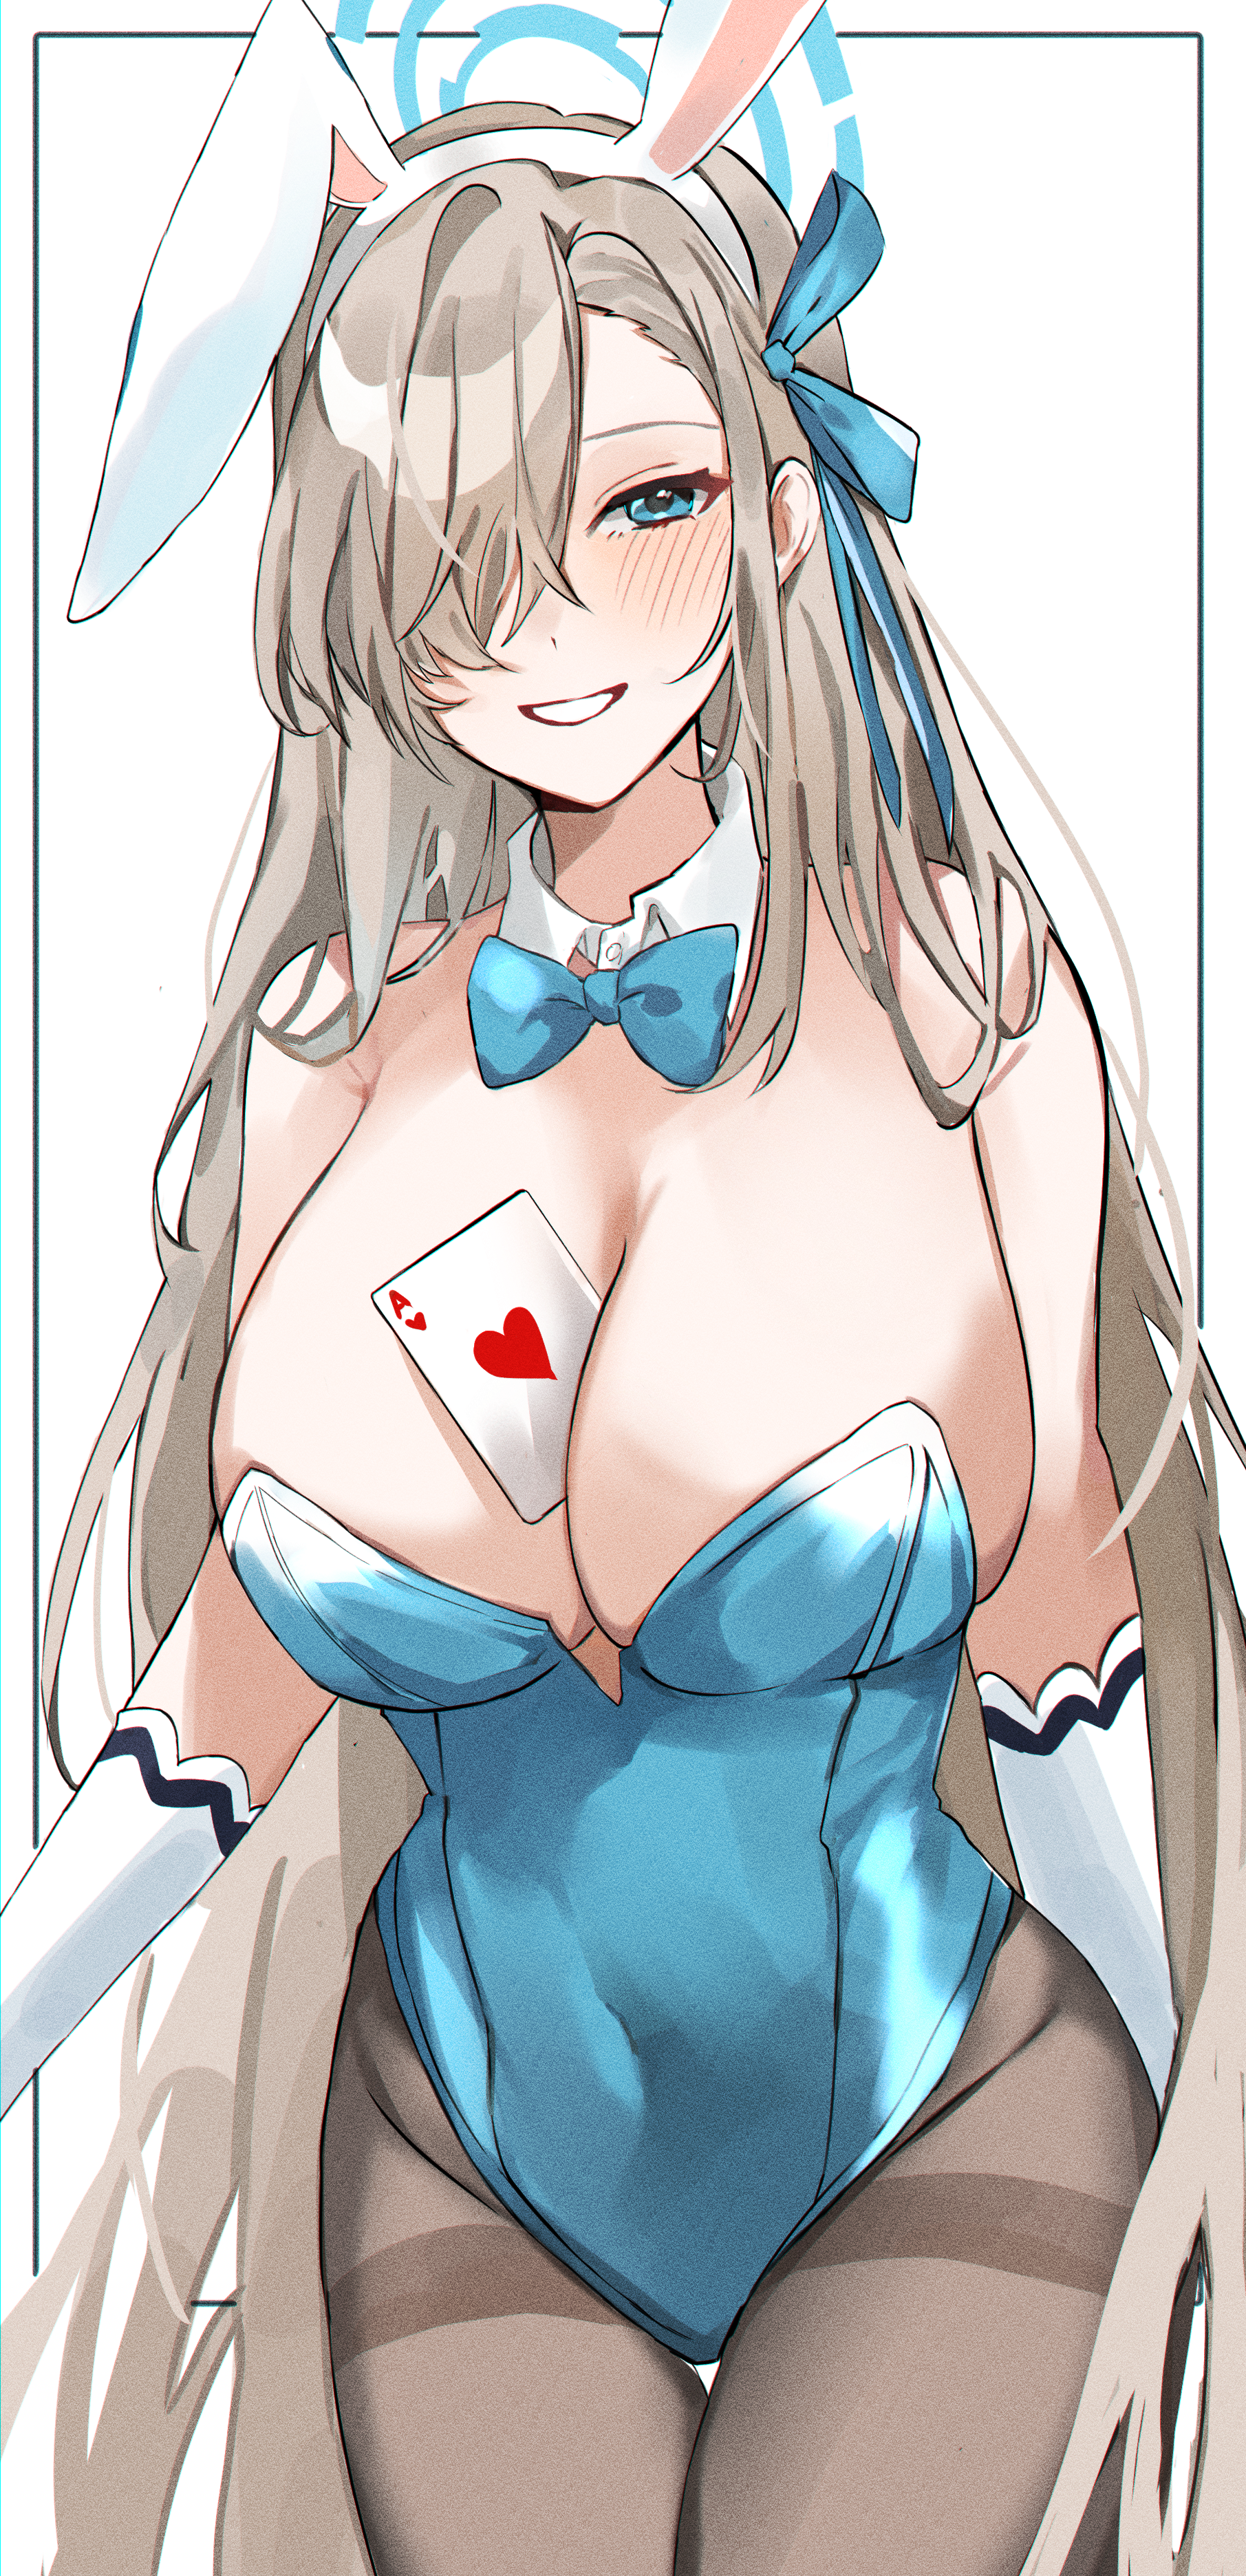 Anime 1811x3744 Blue Archive leotard bunny suit bunny ears pantyhose blonde hair over one eye blue eyes big boobs anime girls cards long hair Asuna Ichinose portrait display blue leotard smiling item between boobs